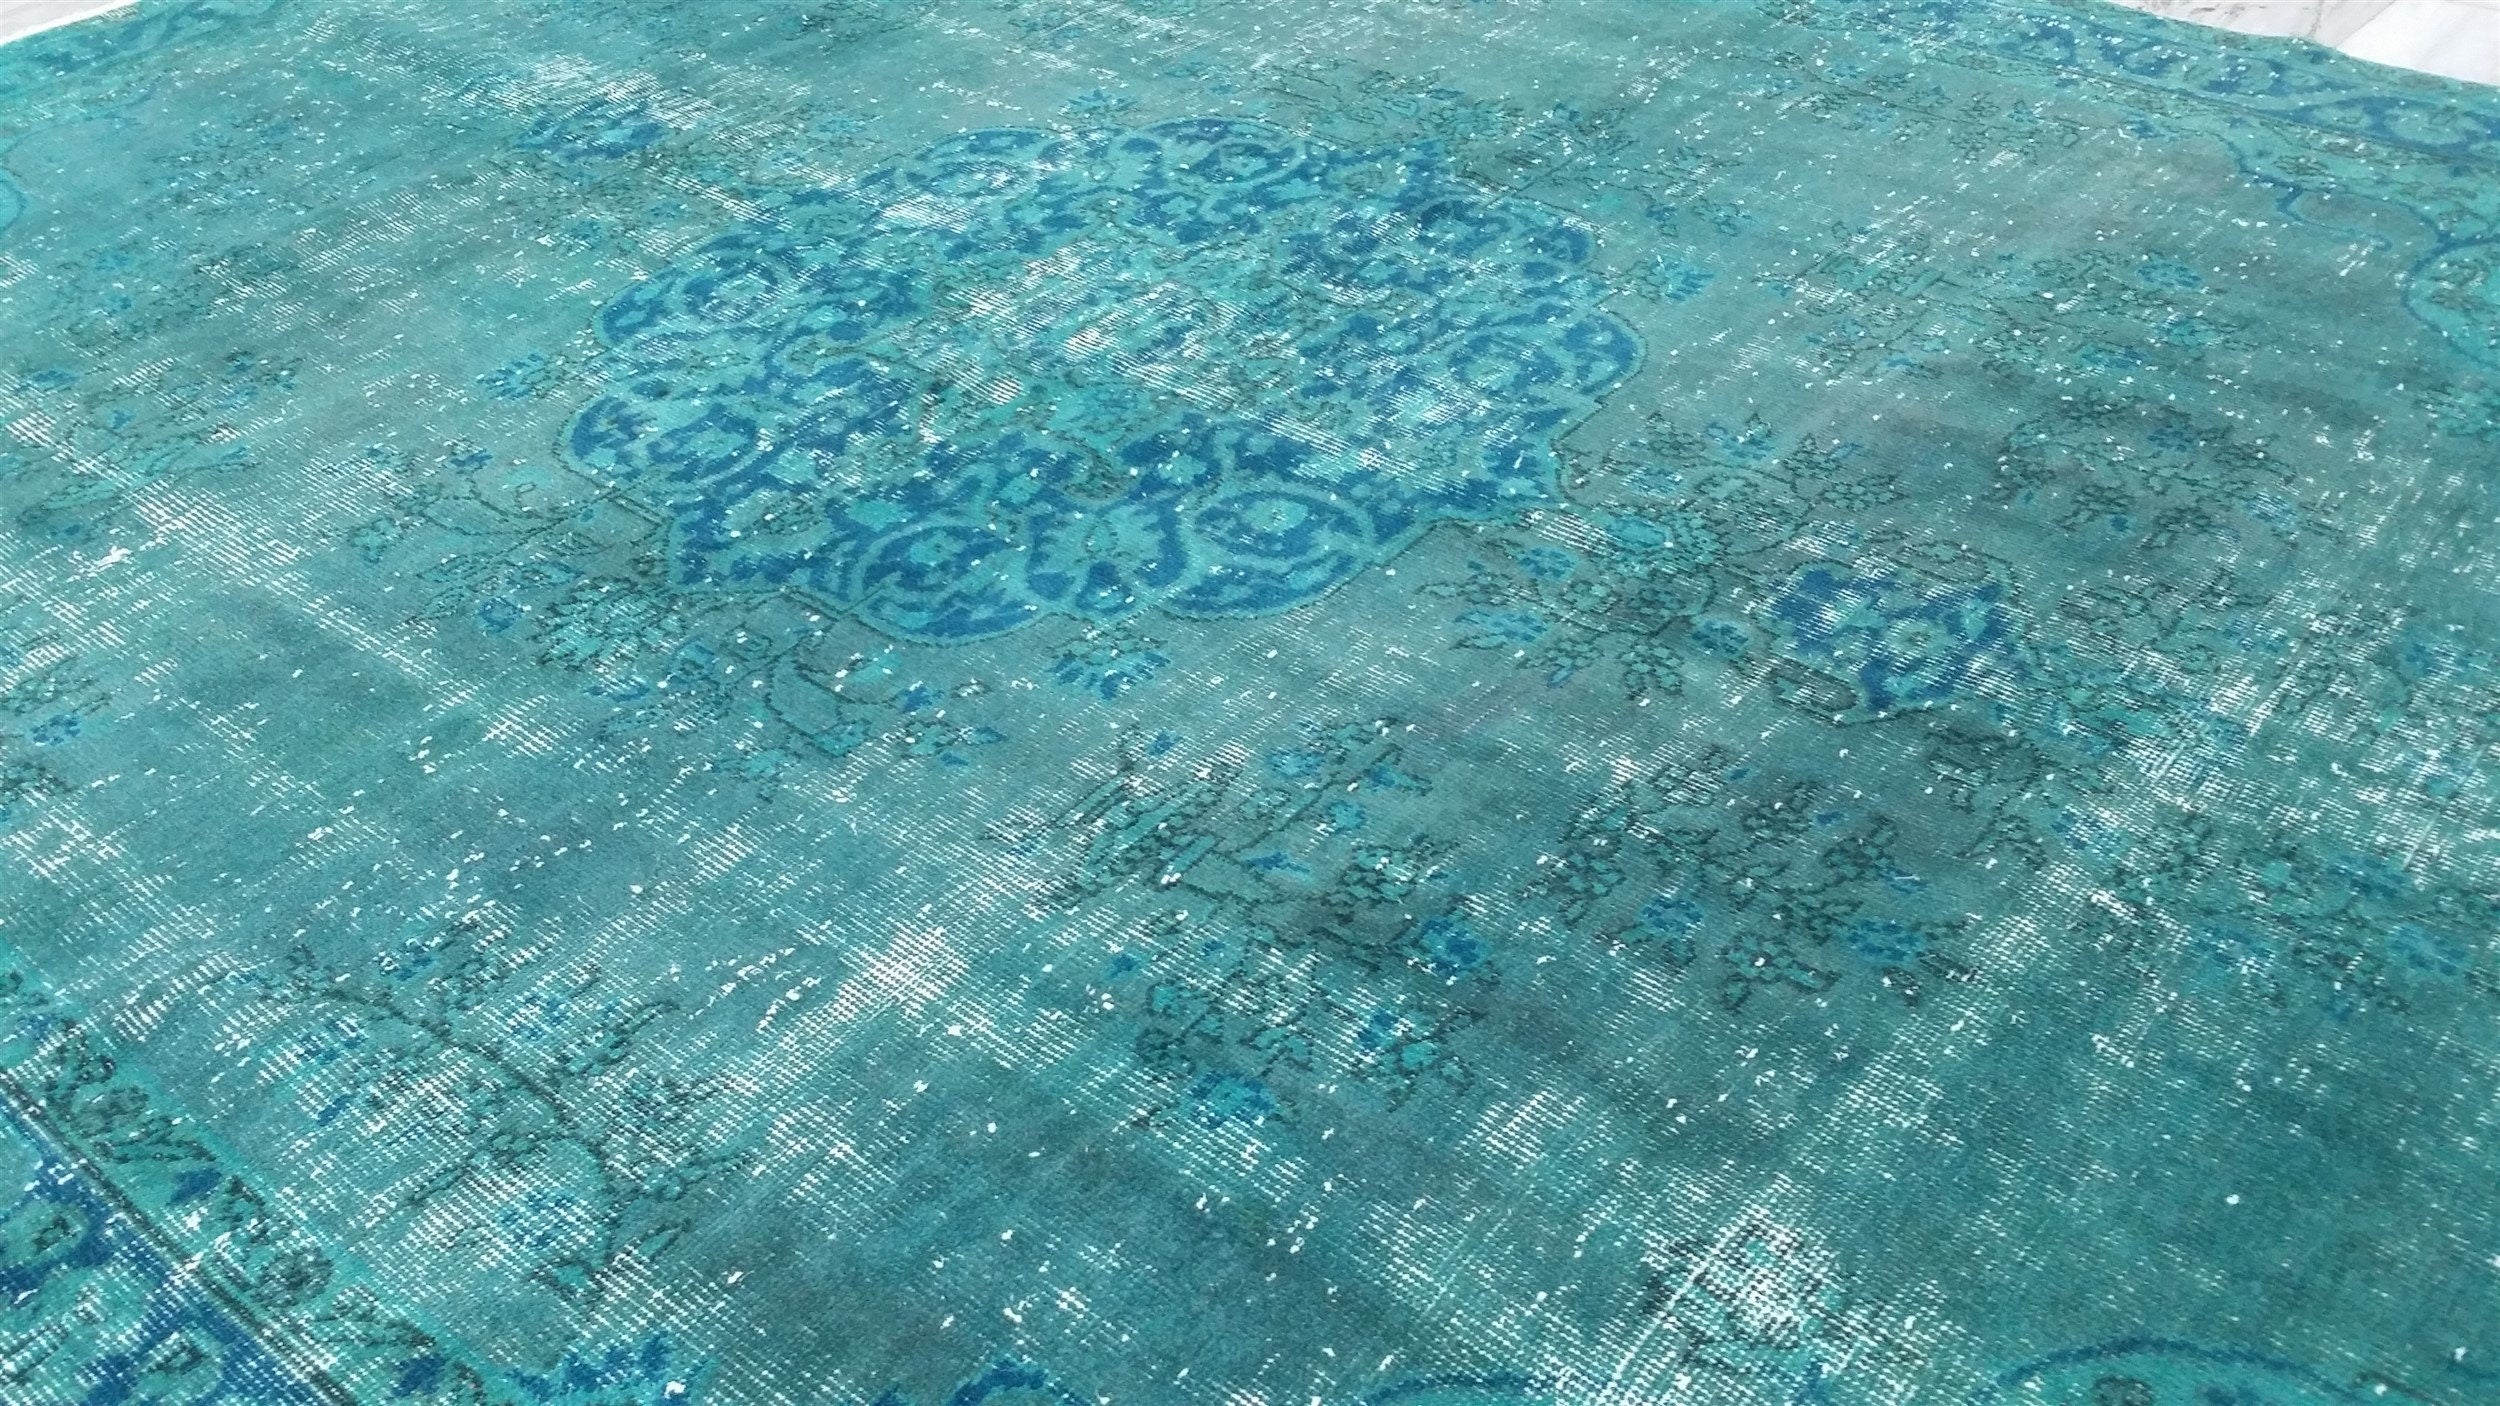 Overdyed Blue Persian Rug, Recycled Vintage Rug 9'9"x6'5"